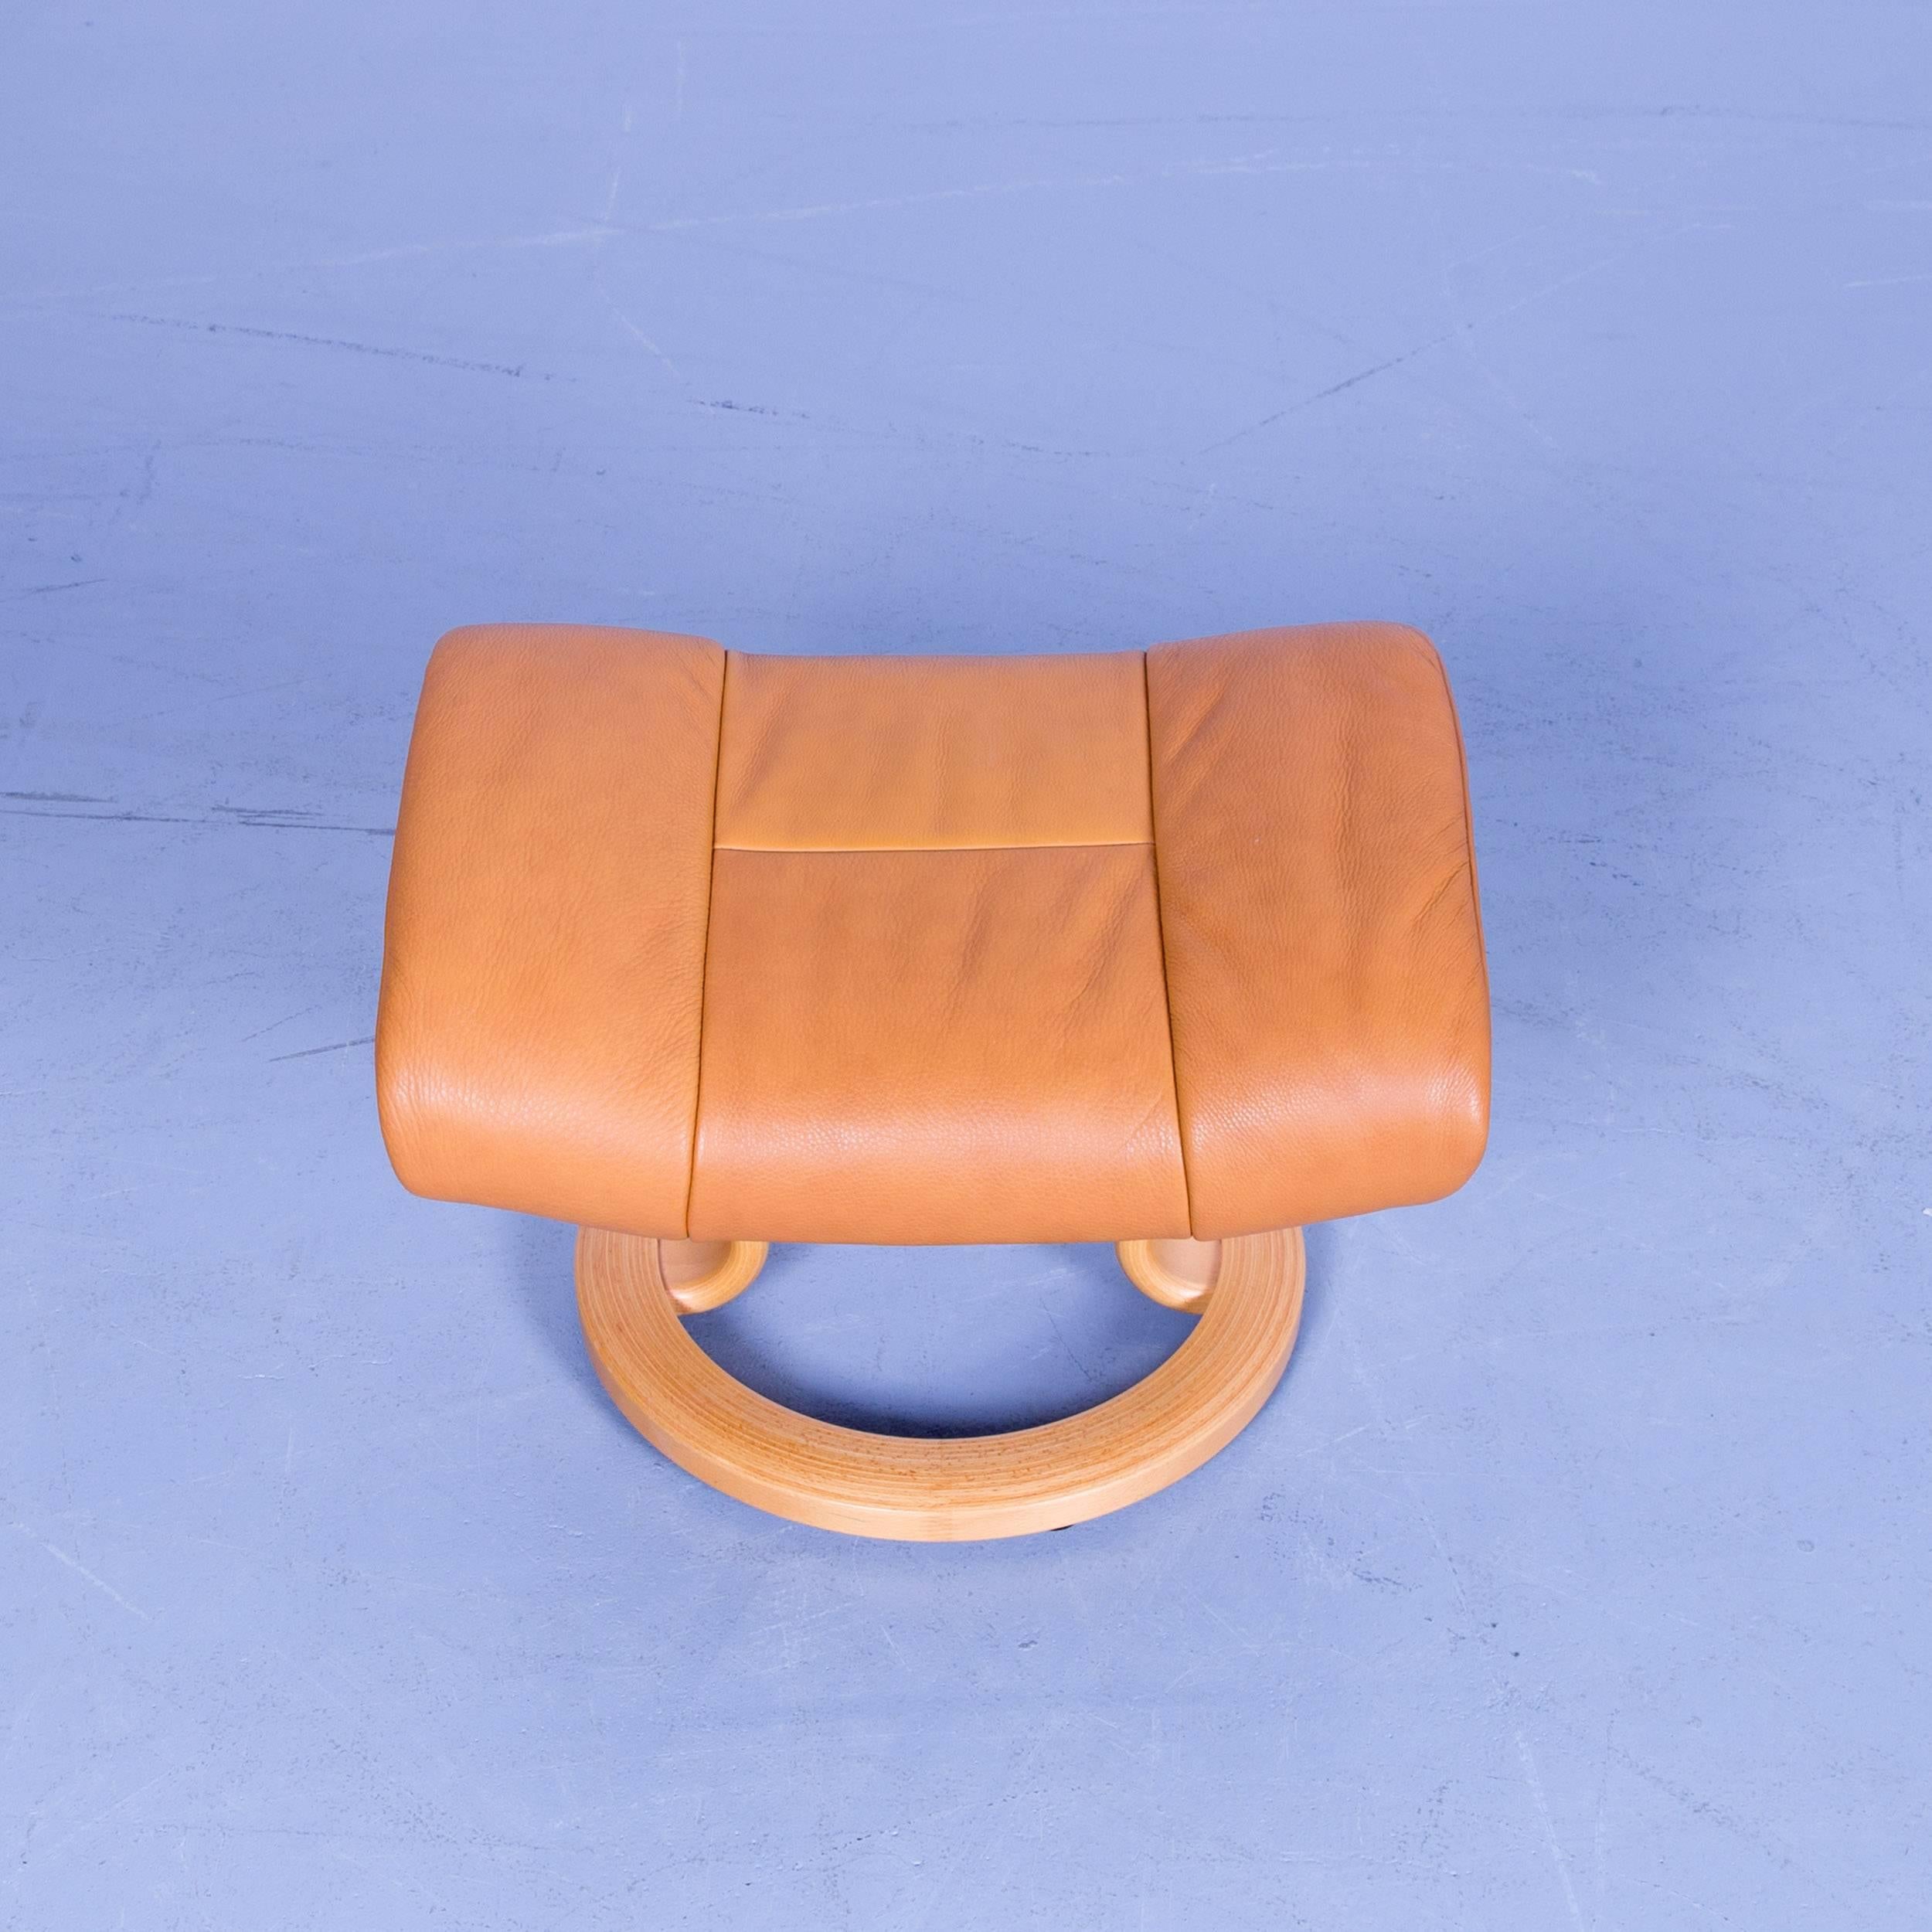 Stressless Mayfair Relax Armchair Footstool Orange Brown Leather Relax Recliner 4